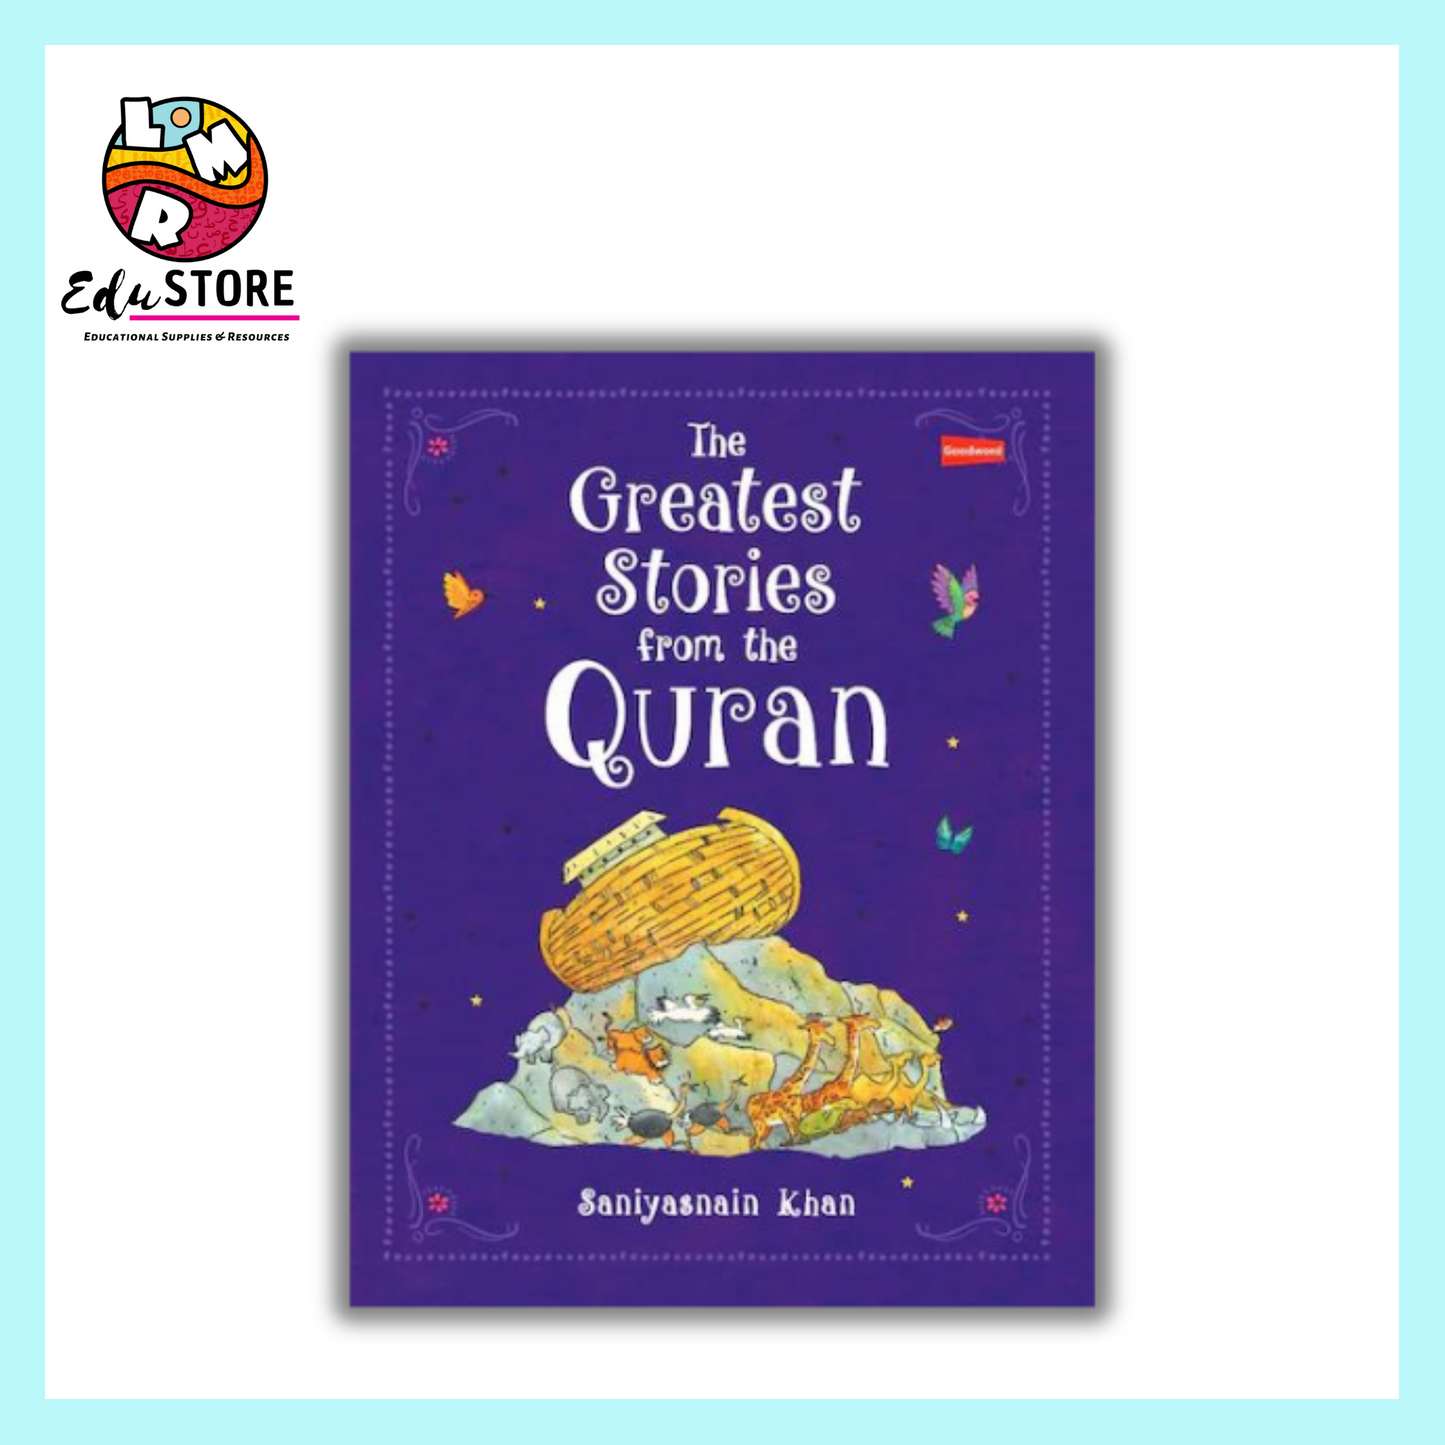 The Greatest Stories from the Quran (Hardbound)